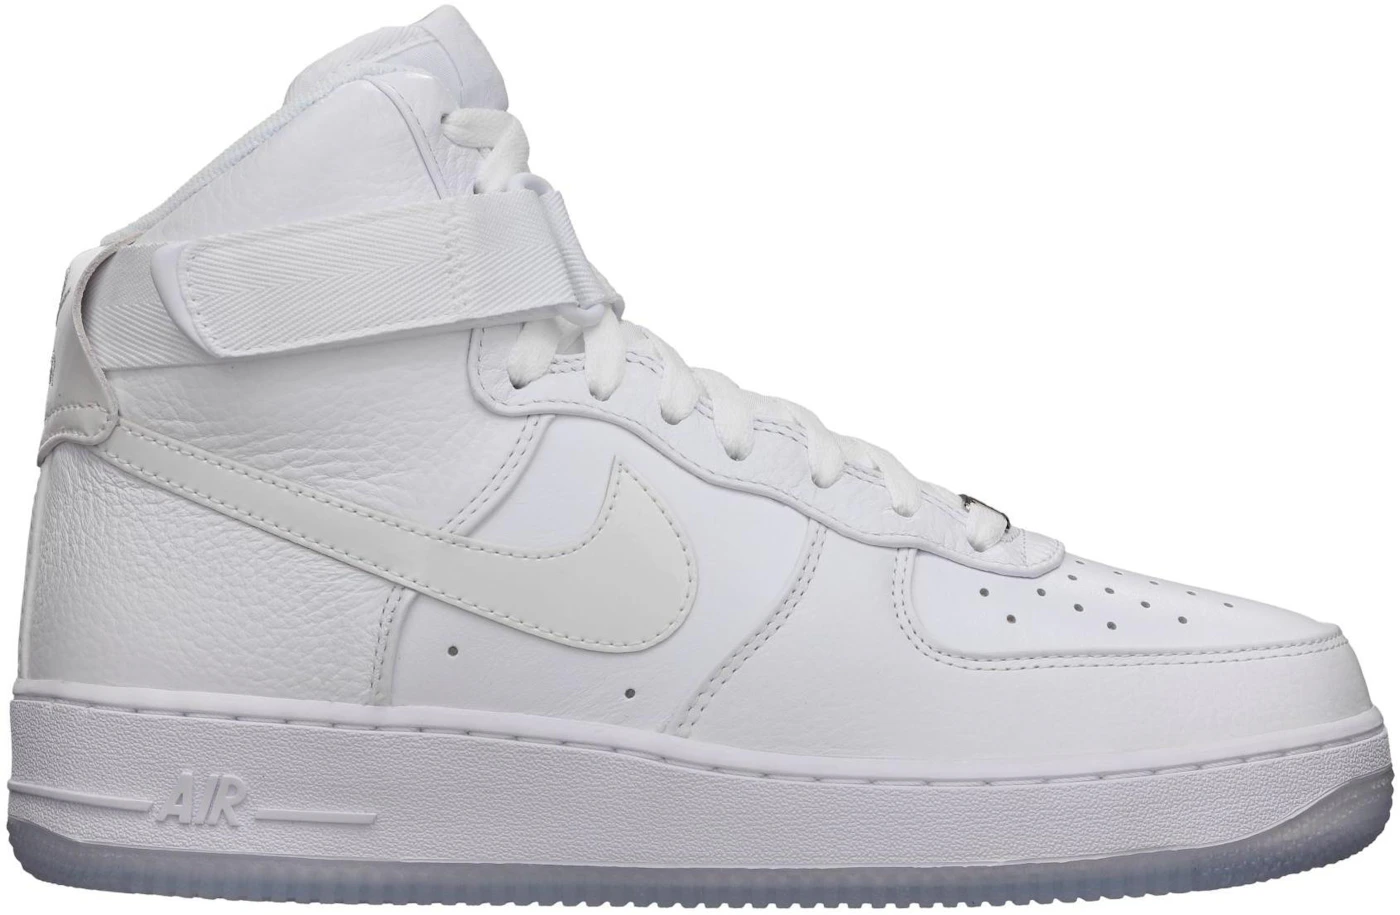 Nike Air Force 1 High trainers in triple white